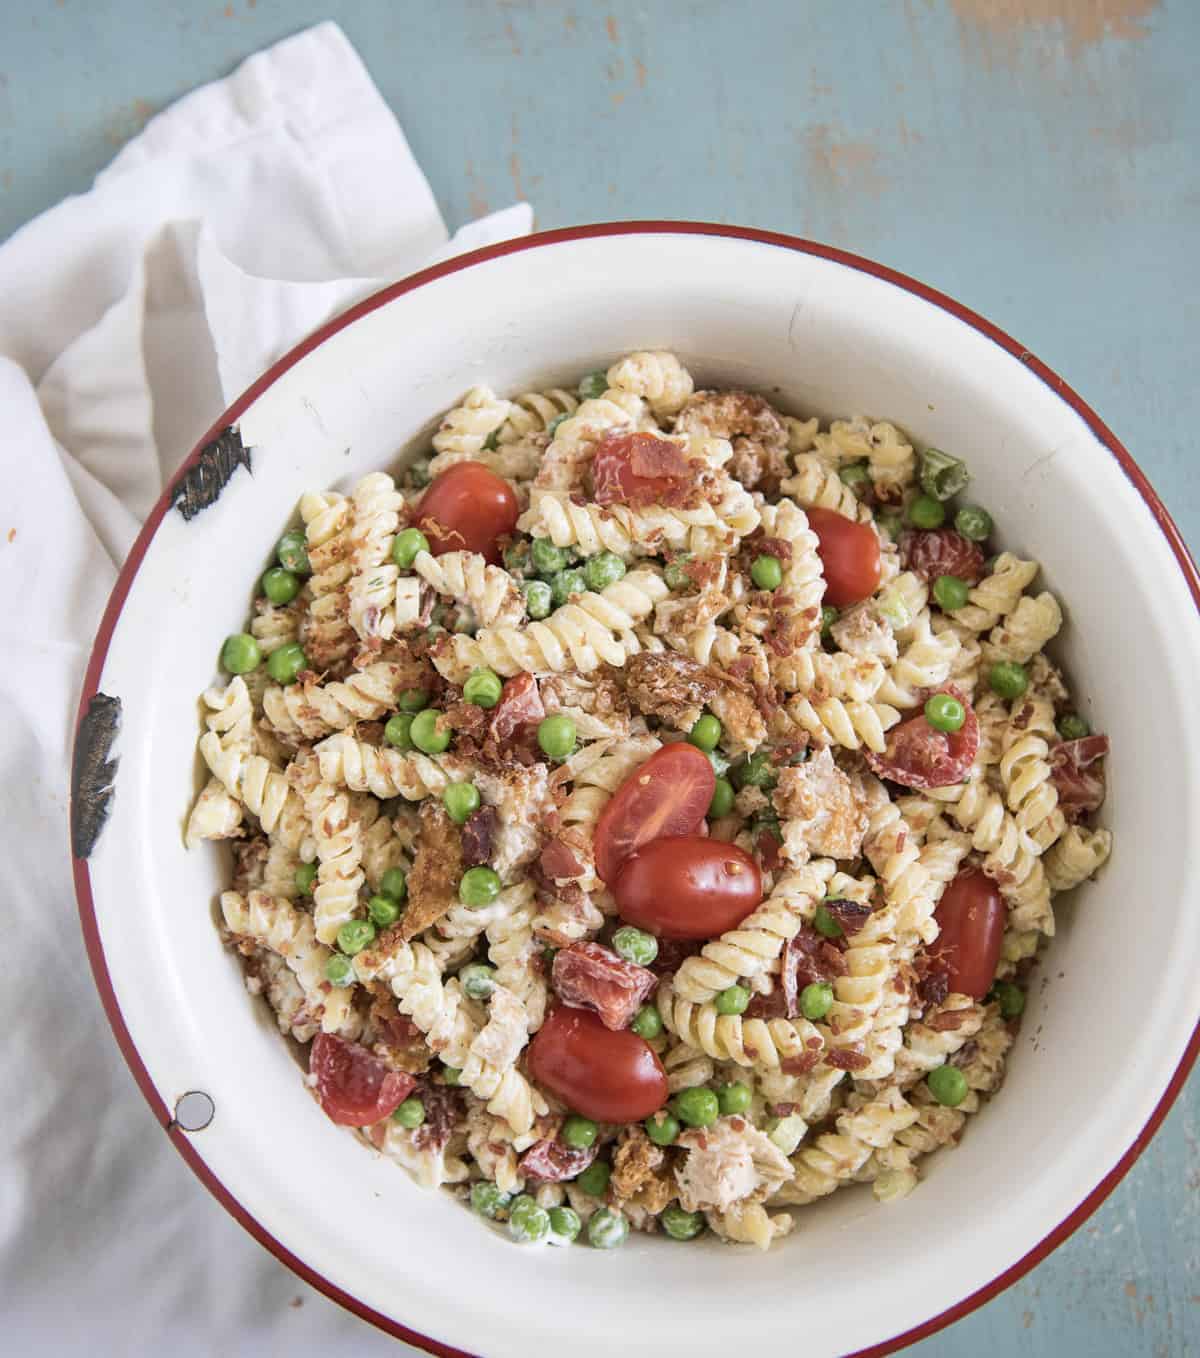 Chicken Bacon Ranch Pasta Salad is our favorite pasta salad recipe that comes together in about 20 minutes and the whole family loves it.